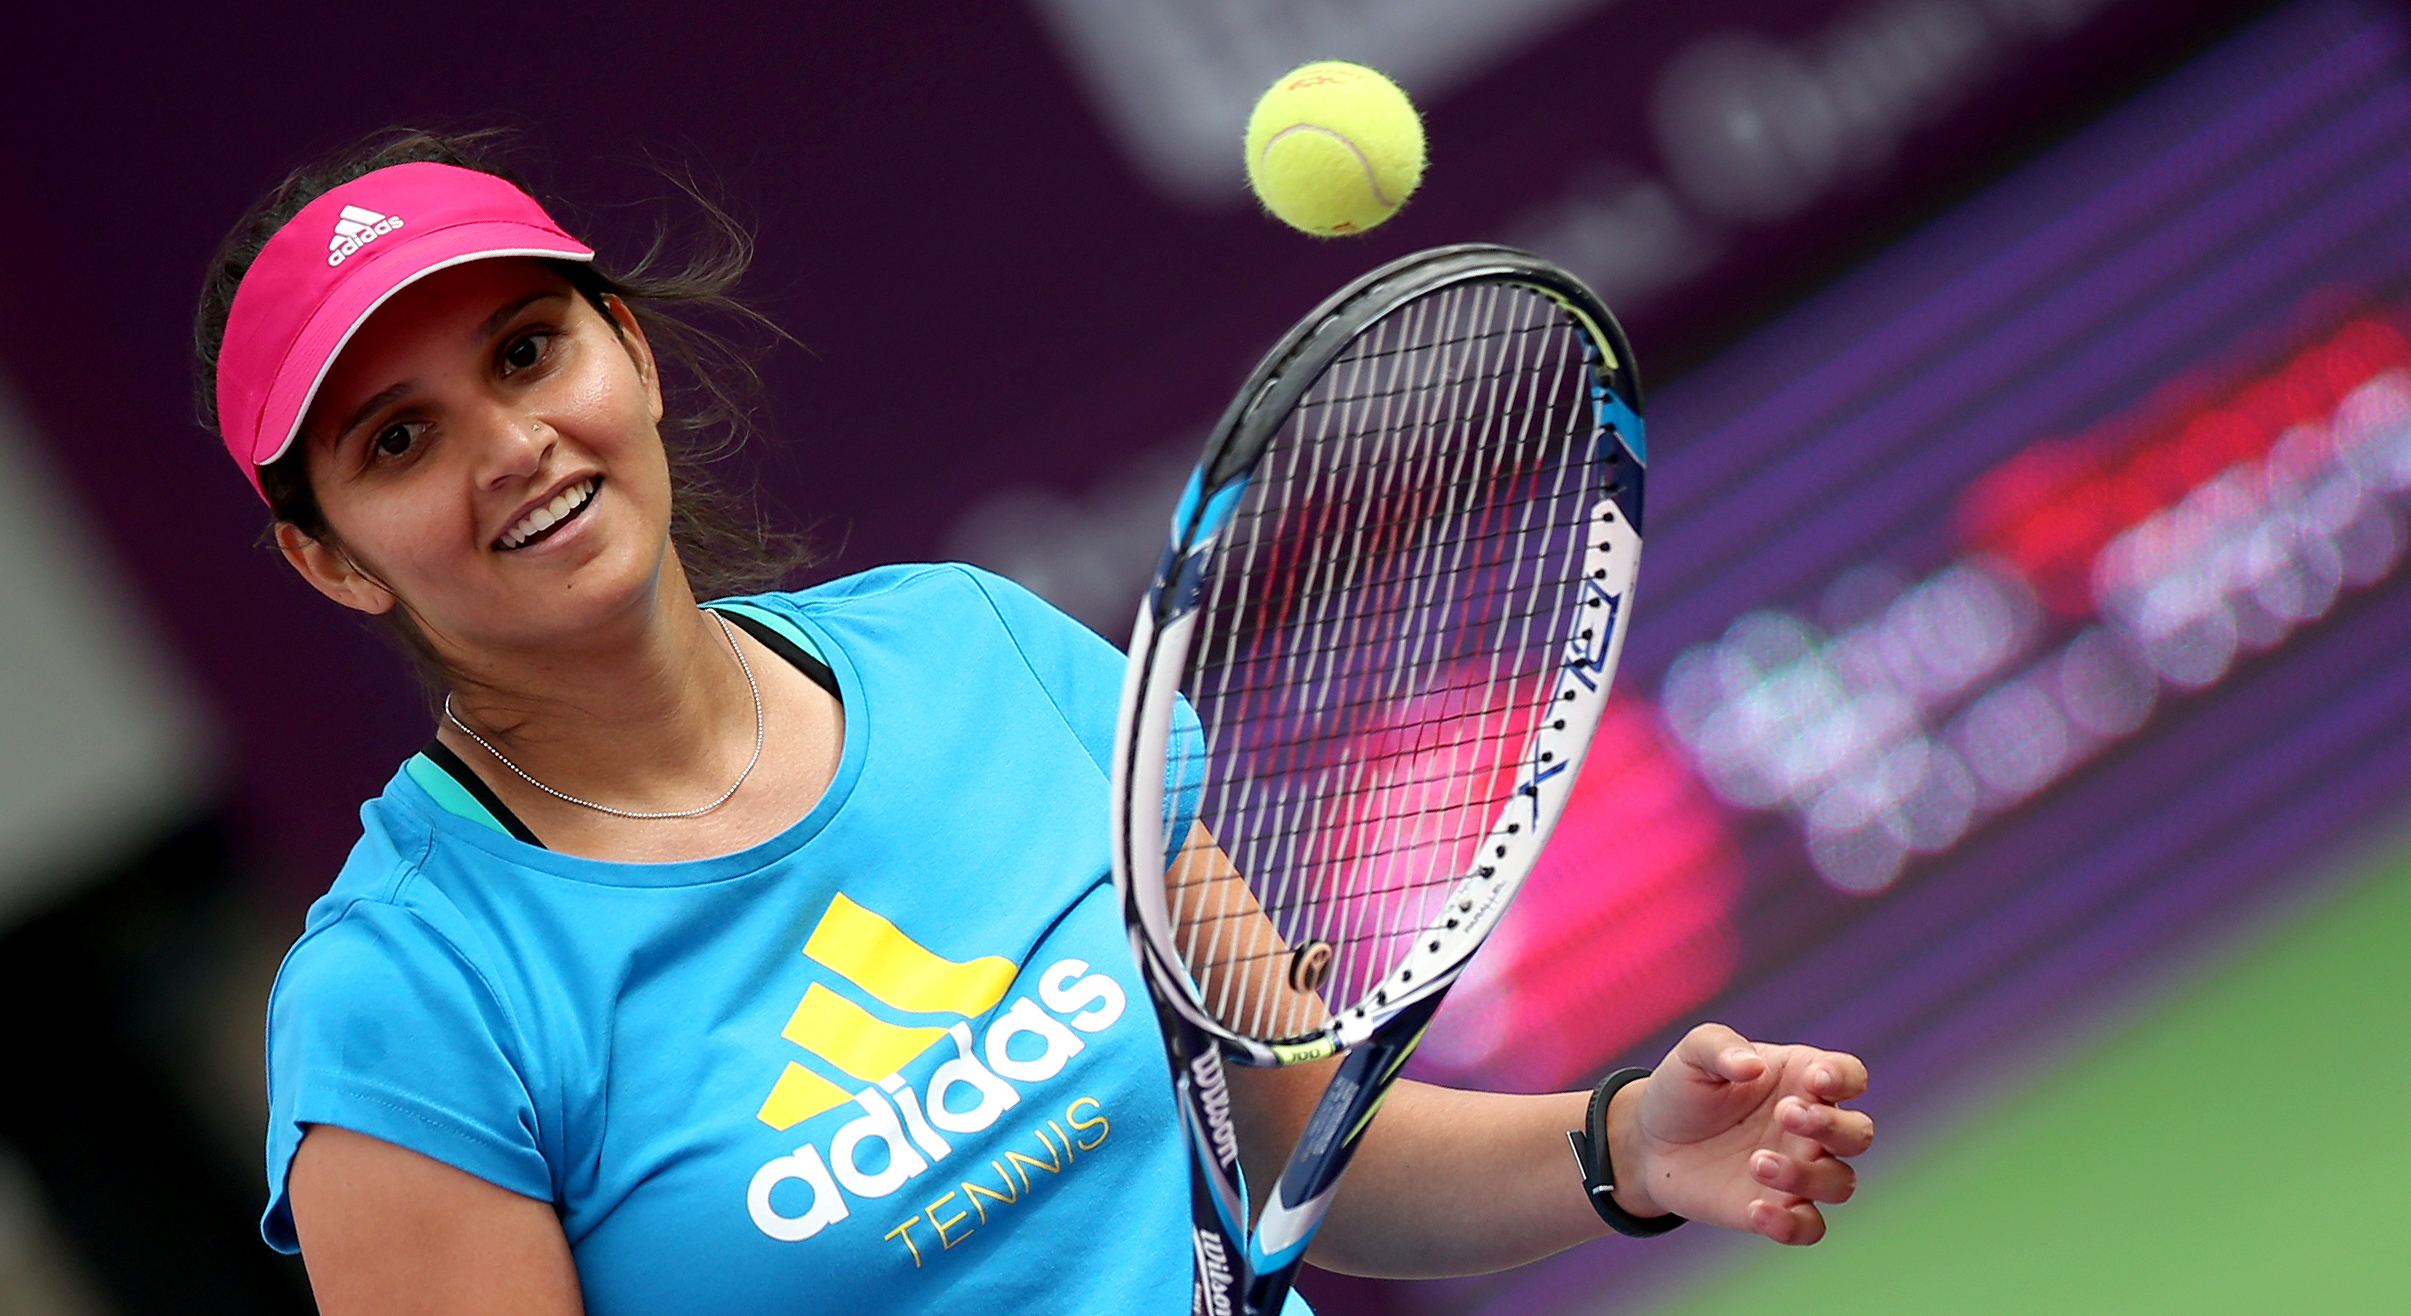 Sania Mirza has announced her retirement from Tennis. She stated that she love playing tennis for her nation.